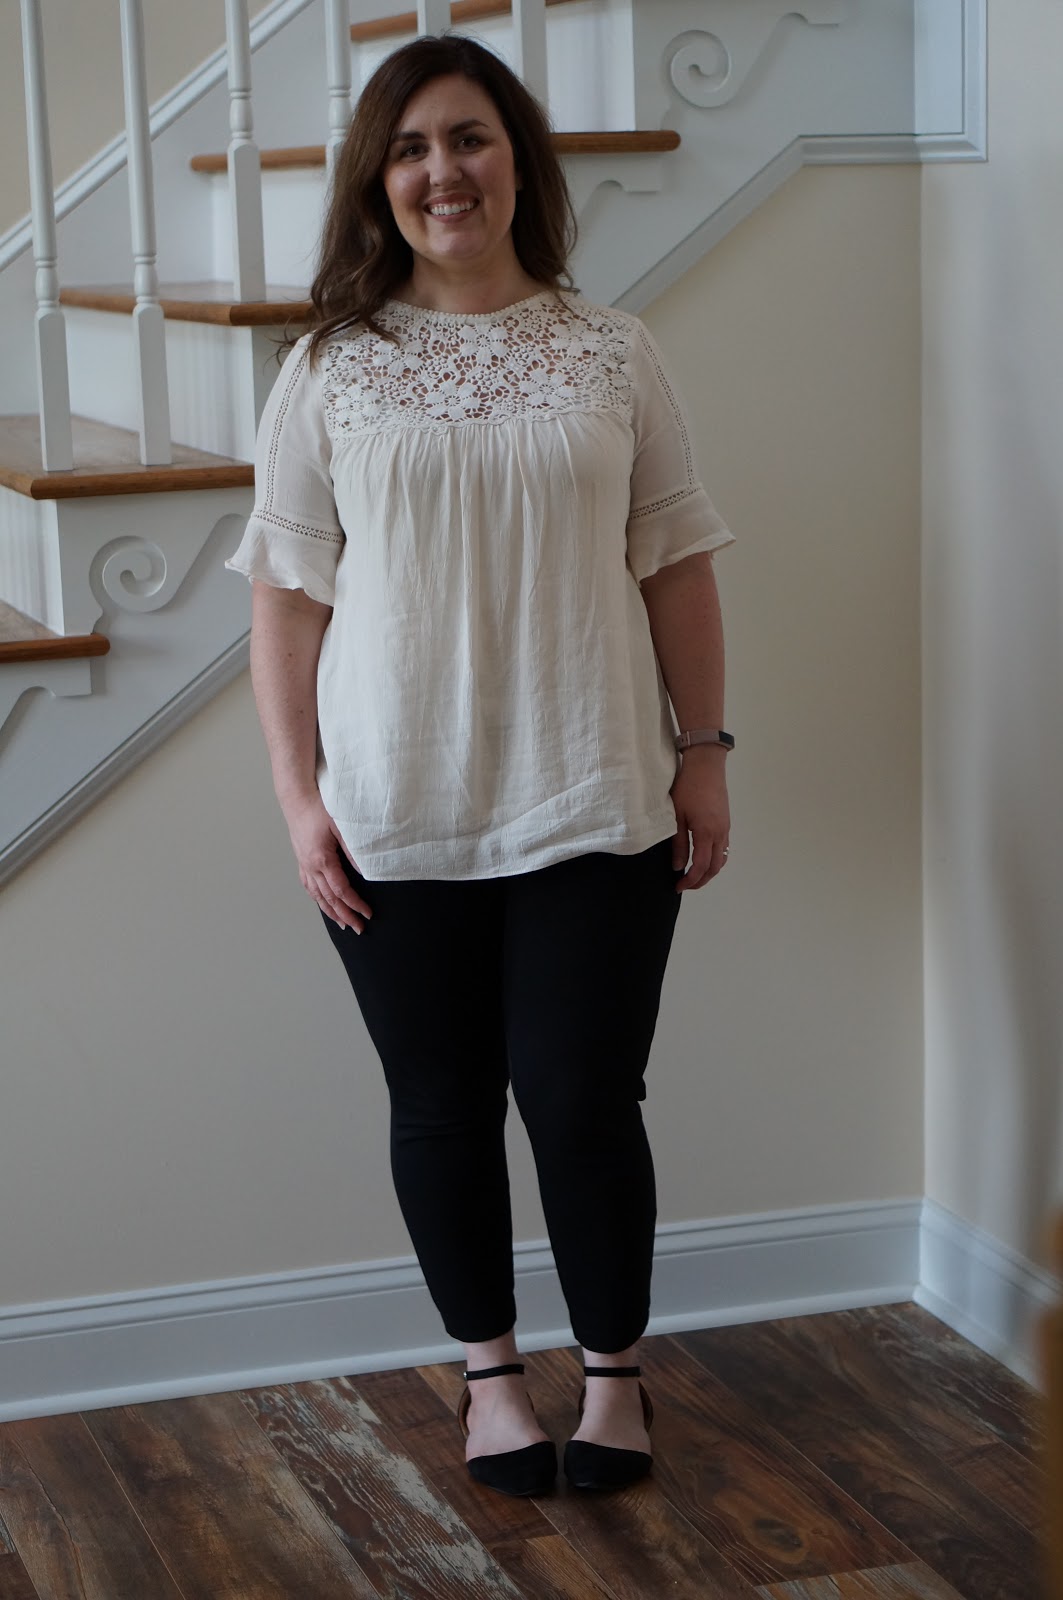 Popular North Carolina style blogger Rebecca Lately shares a gorgeous lace yoke detail top.  Click here to read about this summer appropriate work look!